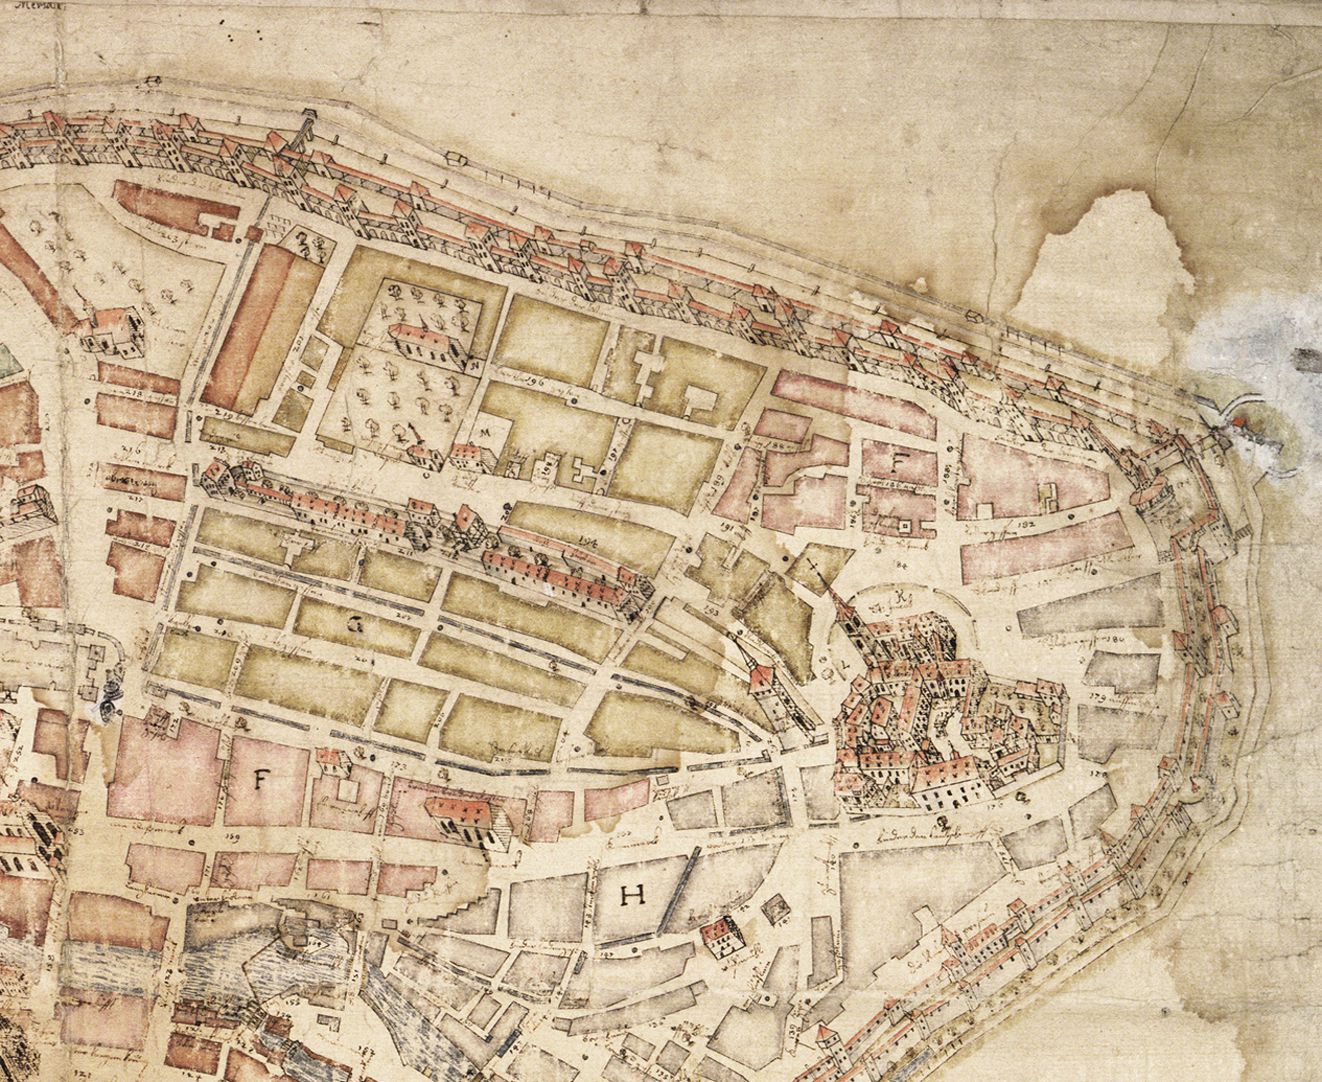 This City of Nuremberg within its enclosing walls… Right upper quarter of the map